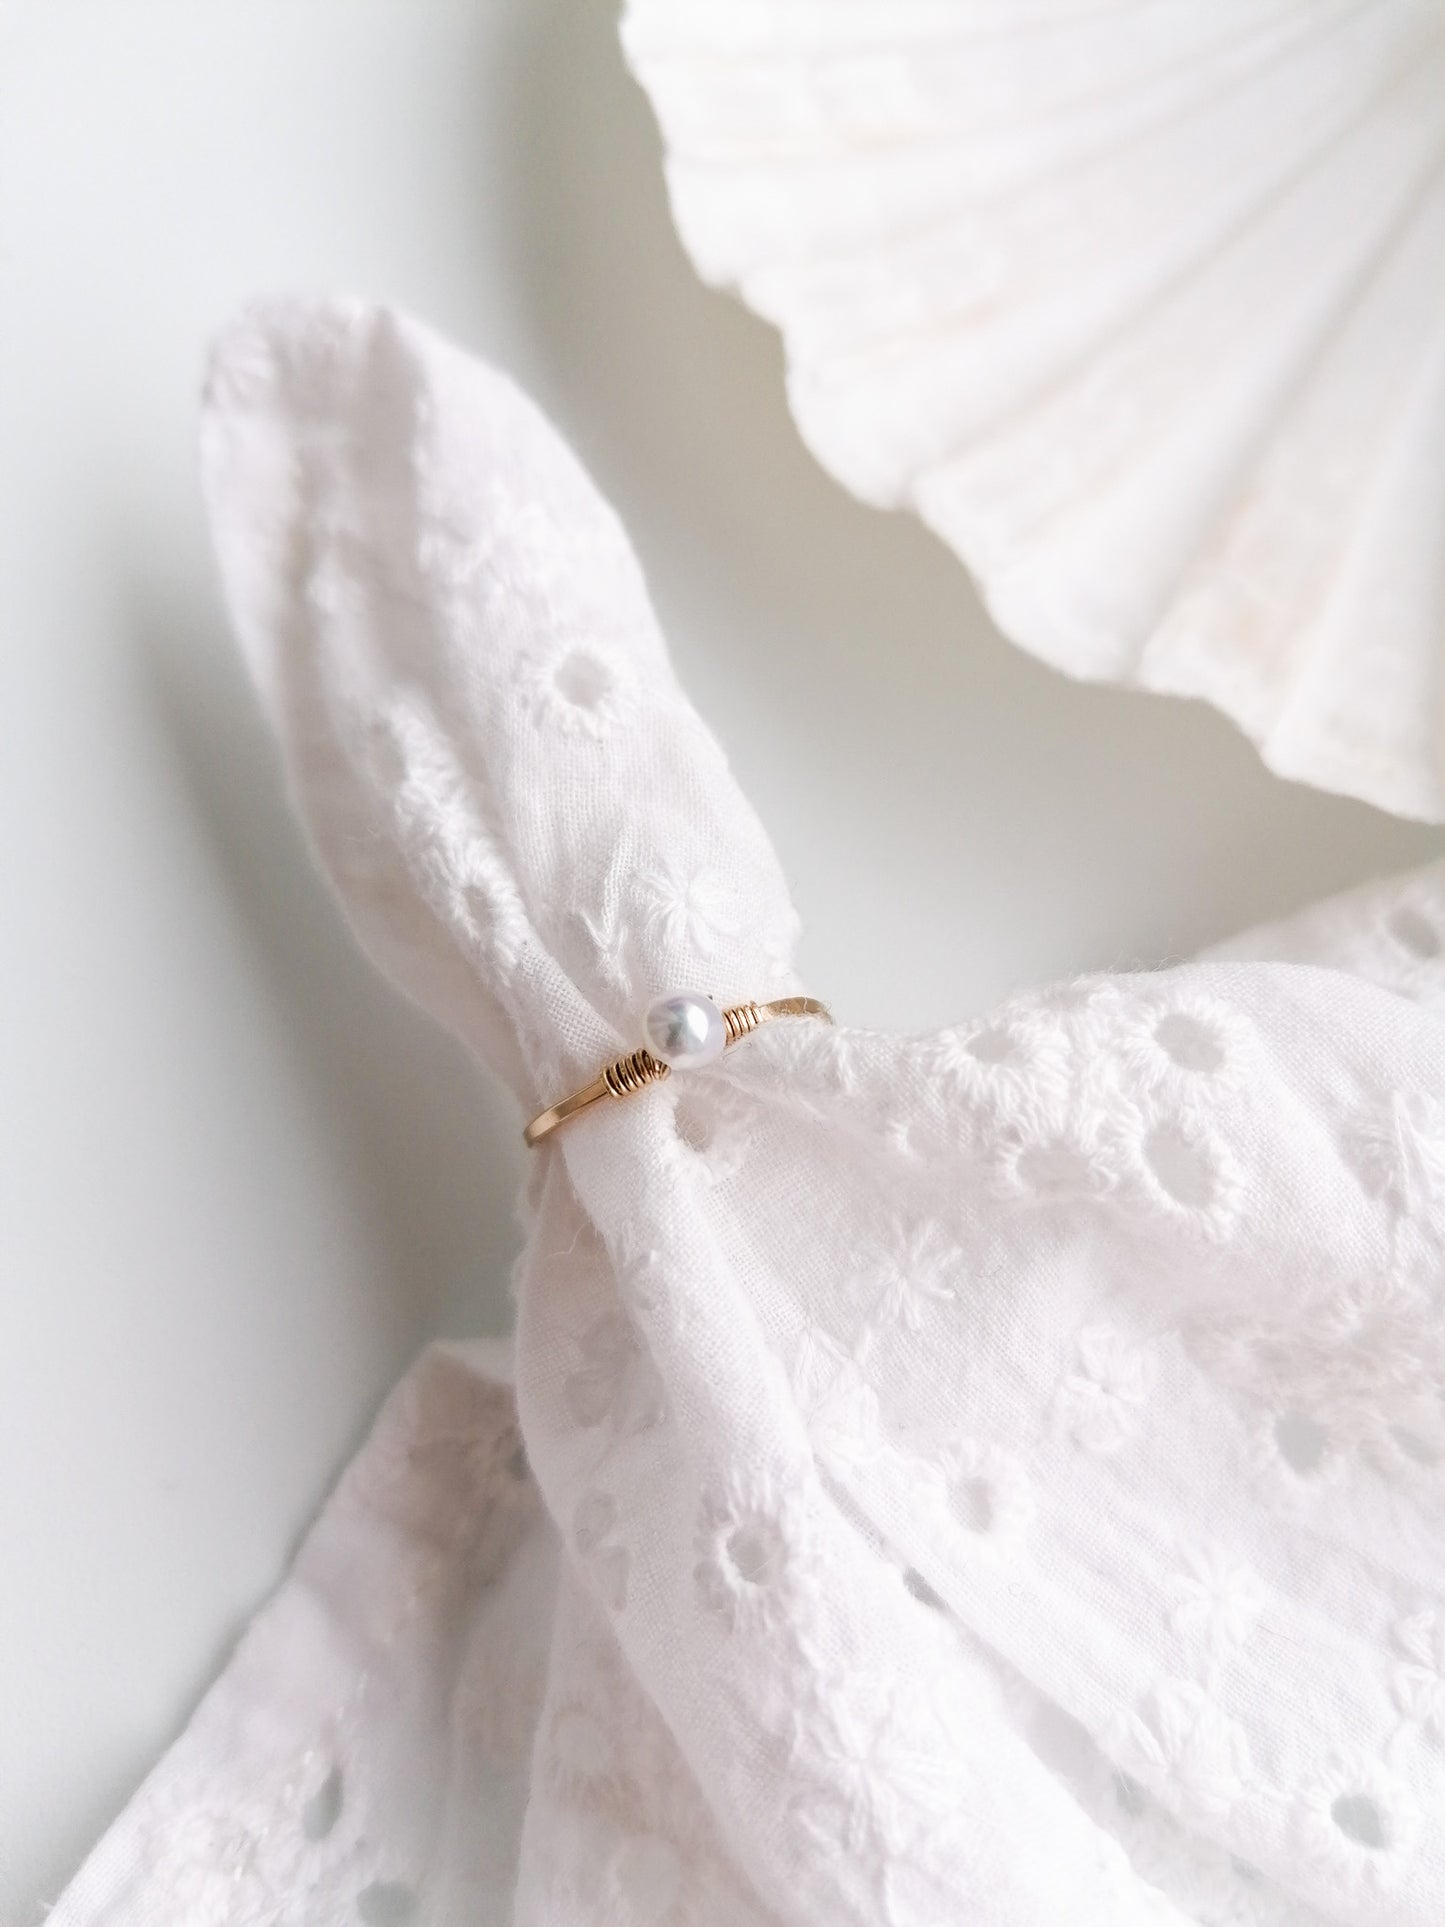 Pearl ring, 14k gold filled